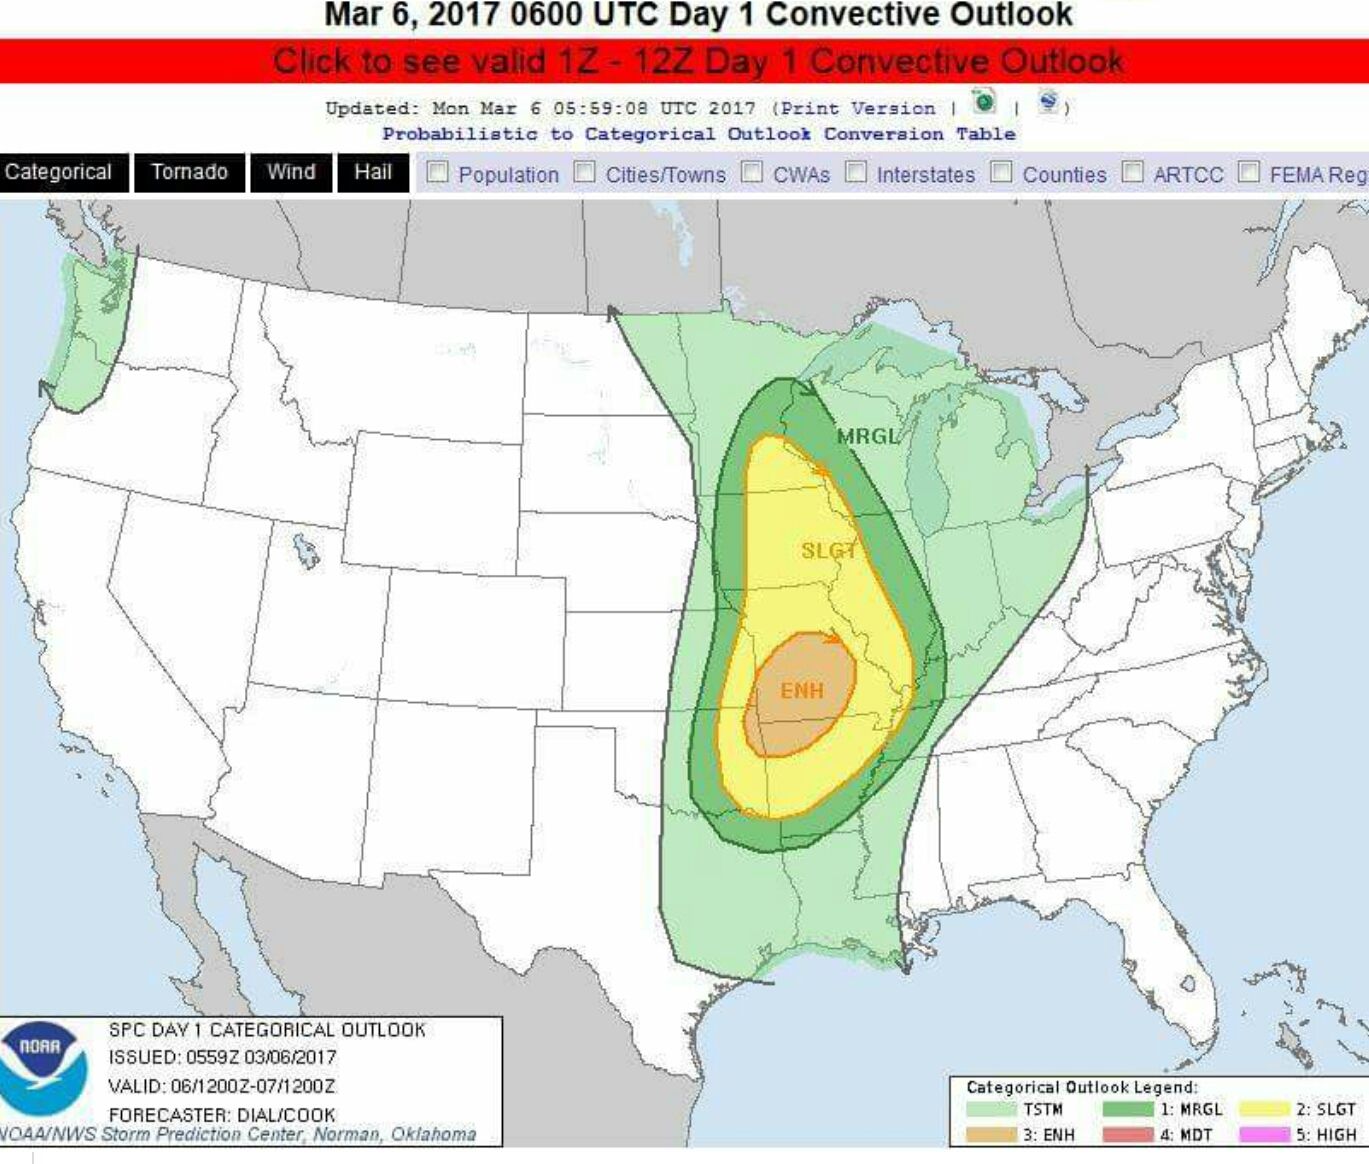 Avocado Warning coming to the Midwest